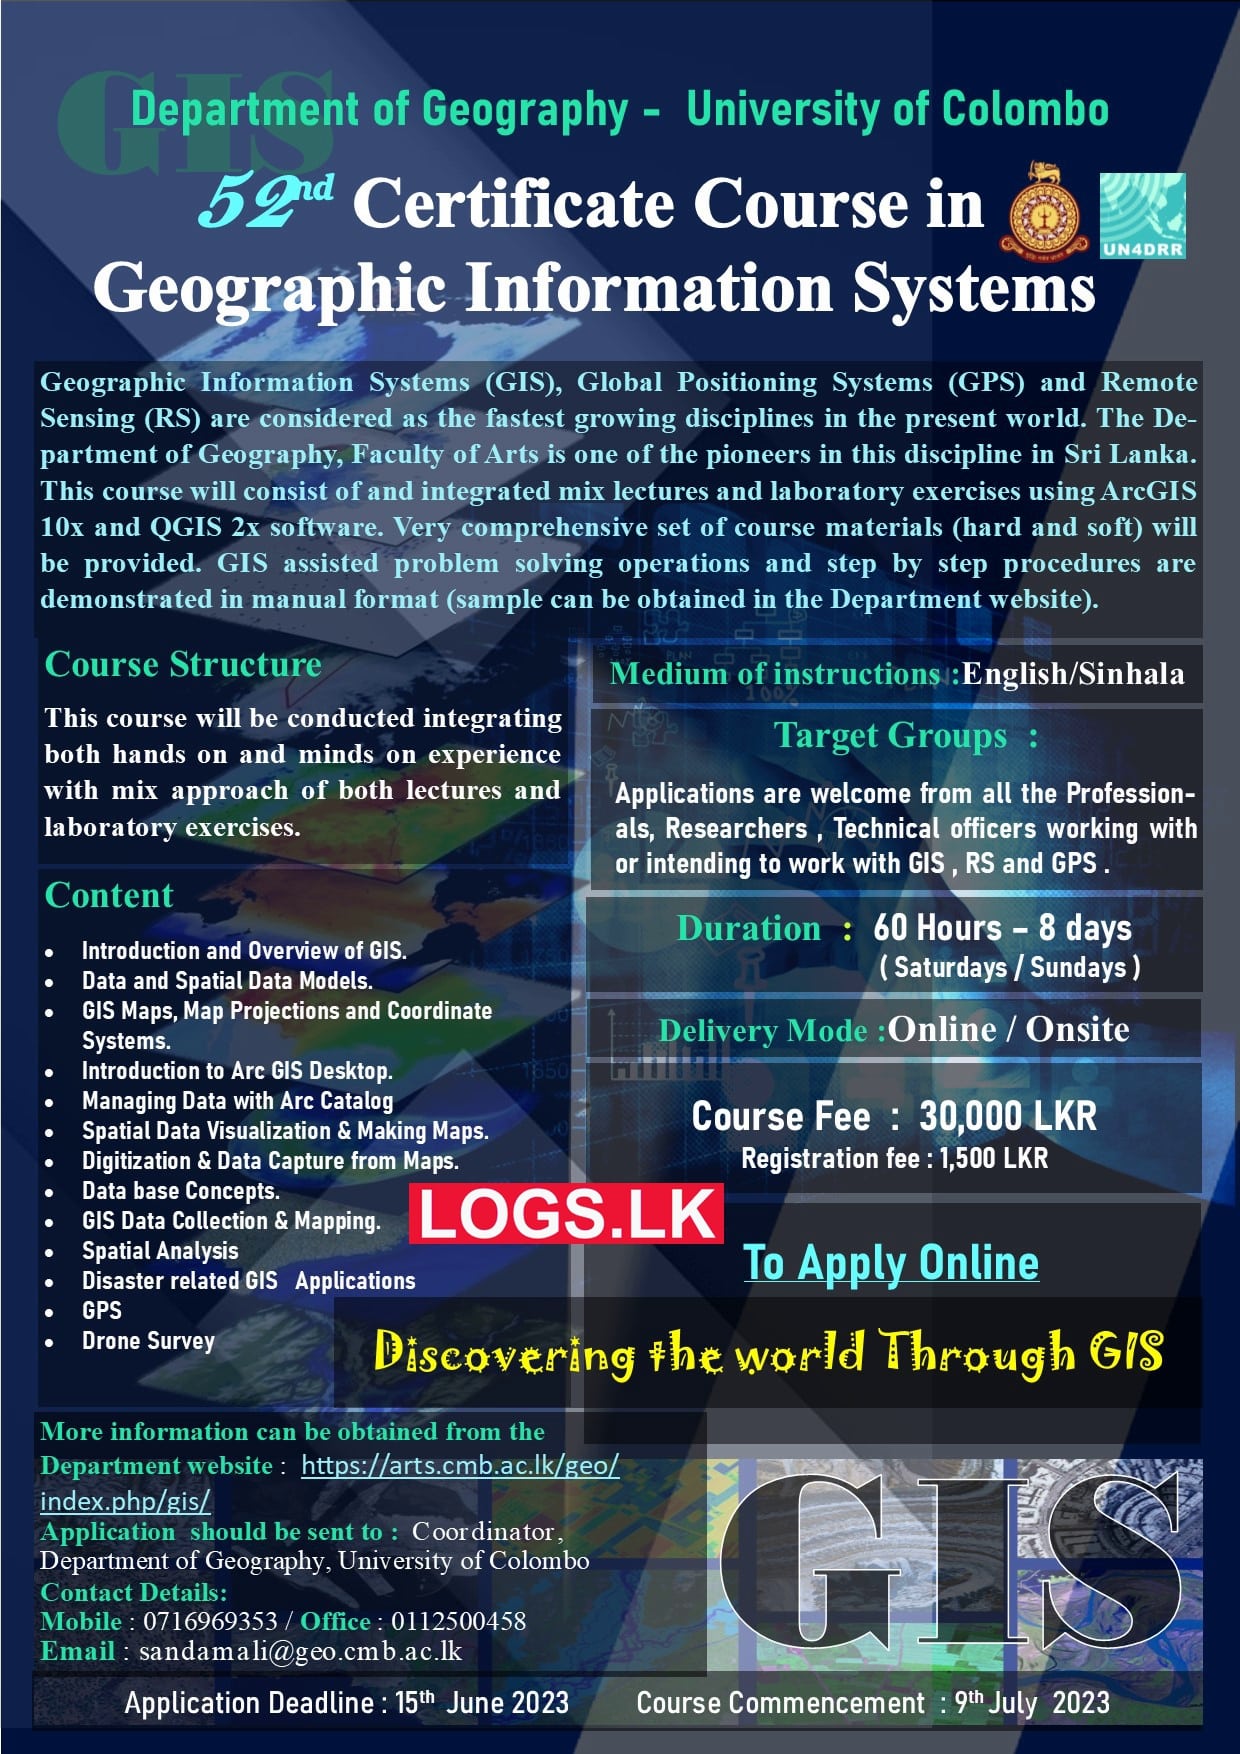 Certificate Course in Geographical Information Systems (GIS) 2023 at University of Colombo